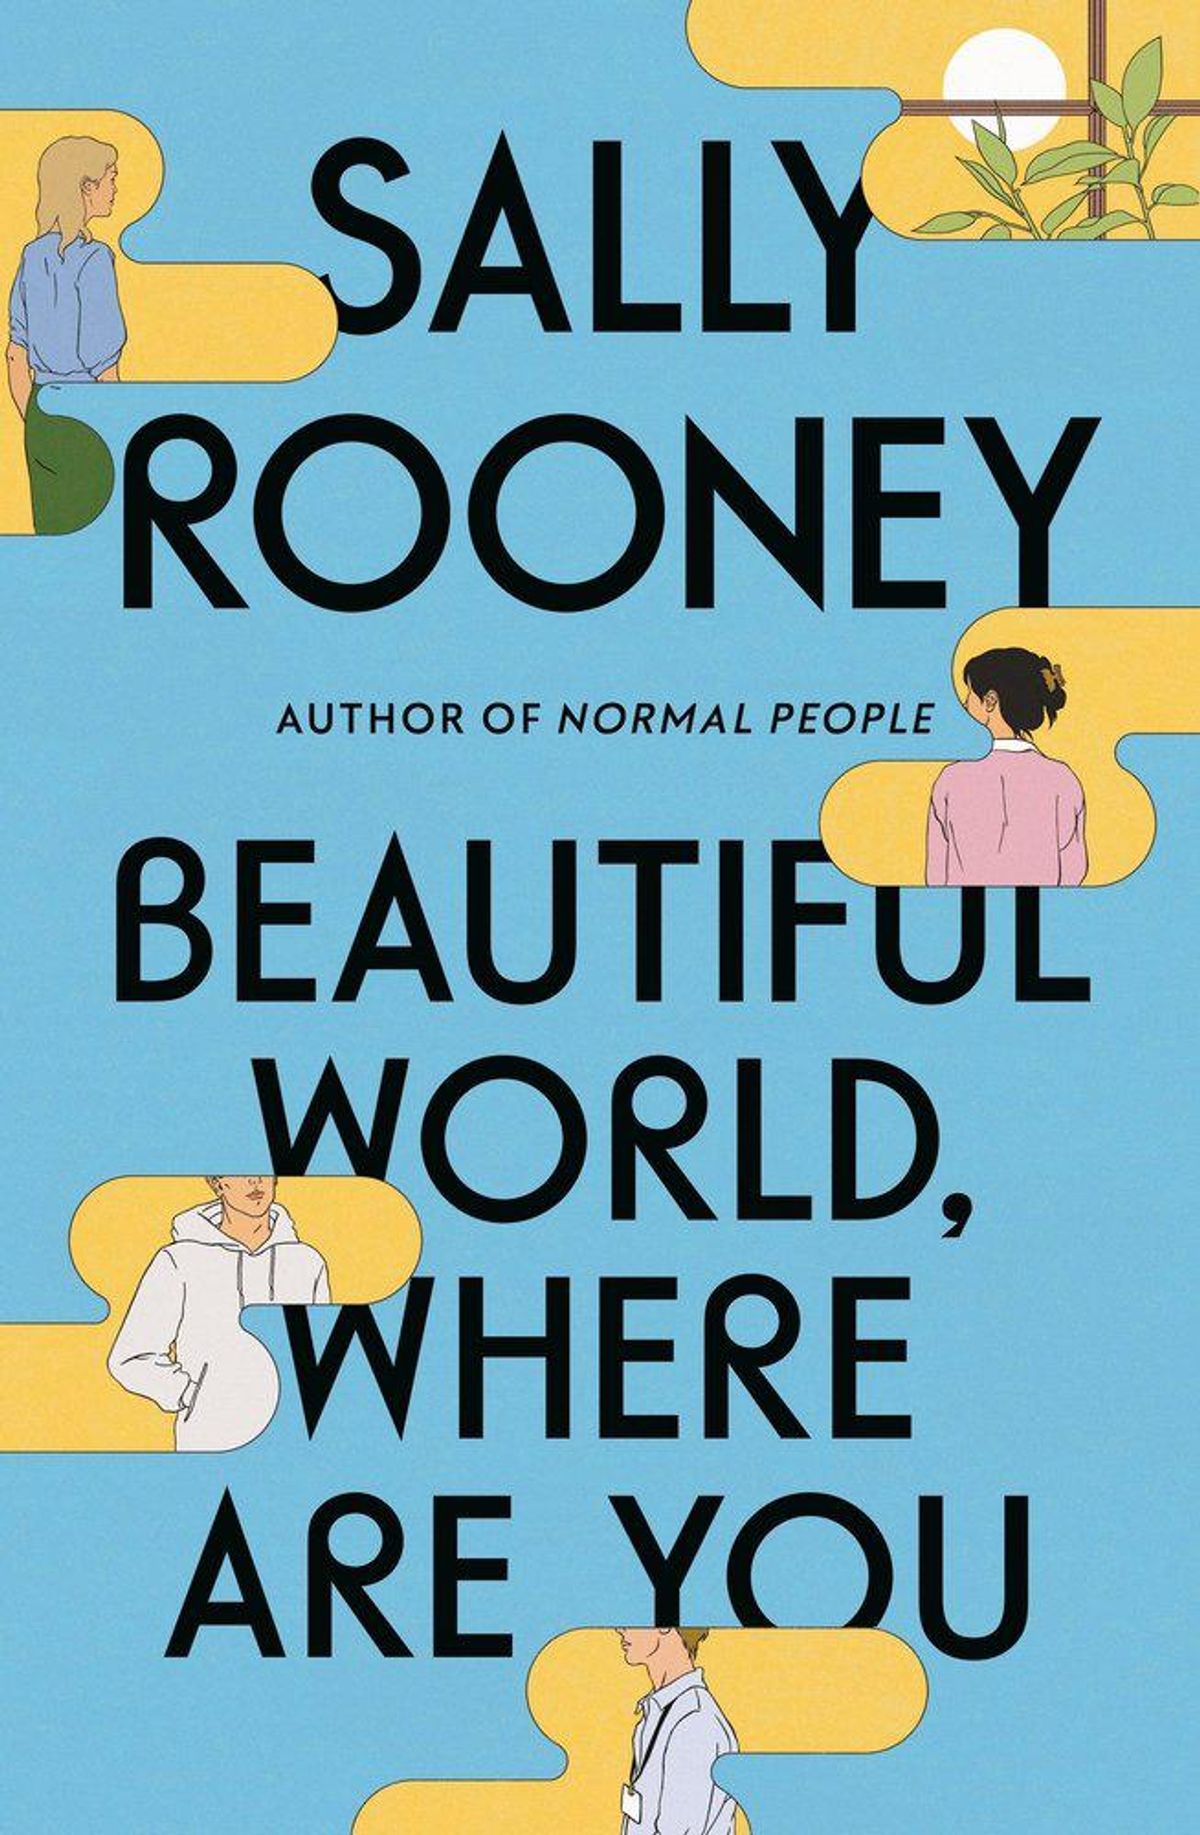 sally rooney beautiful world where are you